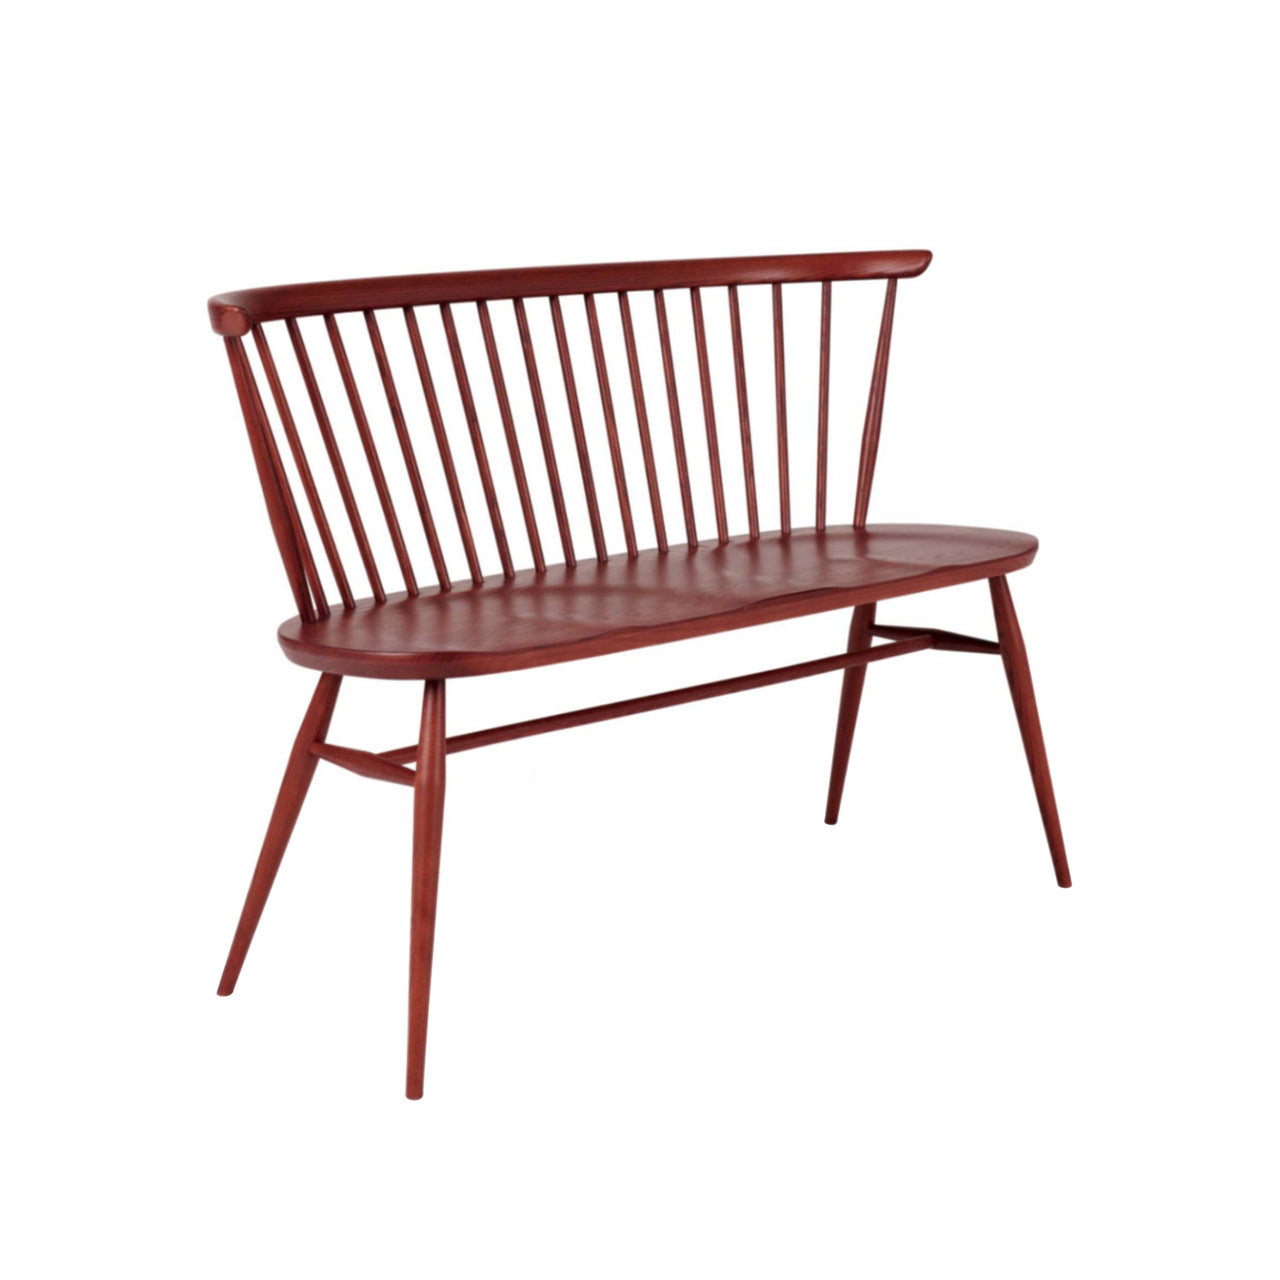 Originals Love Seat Bench: Stained Vintage Red